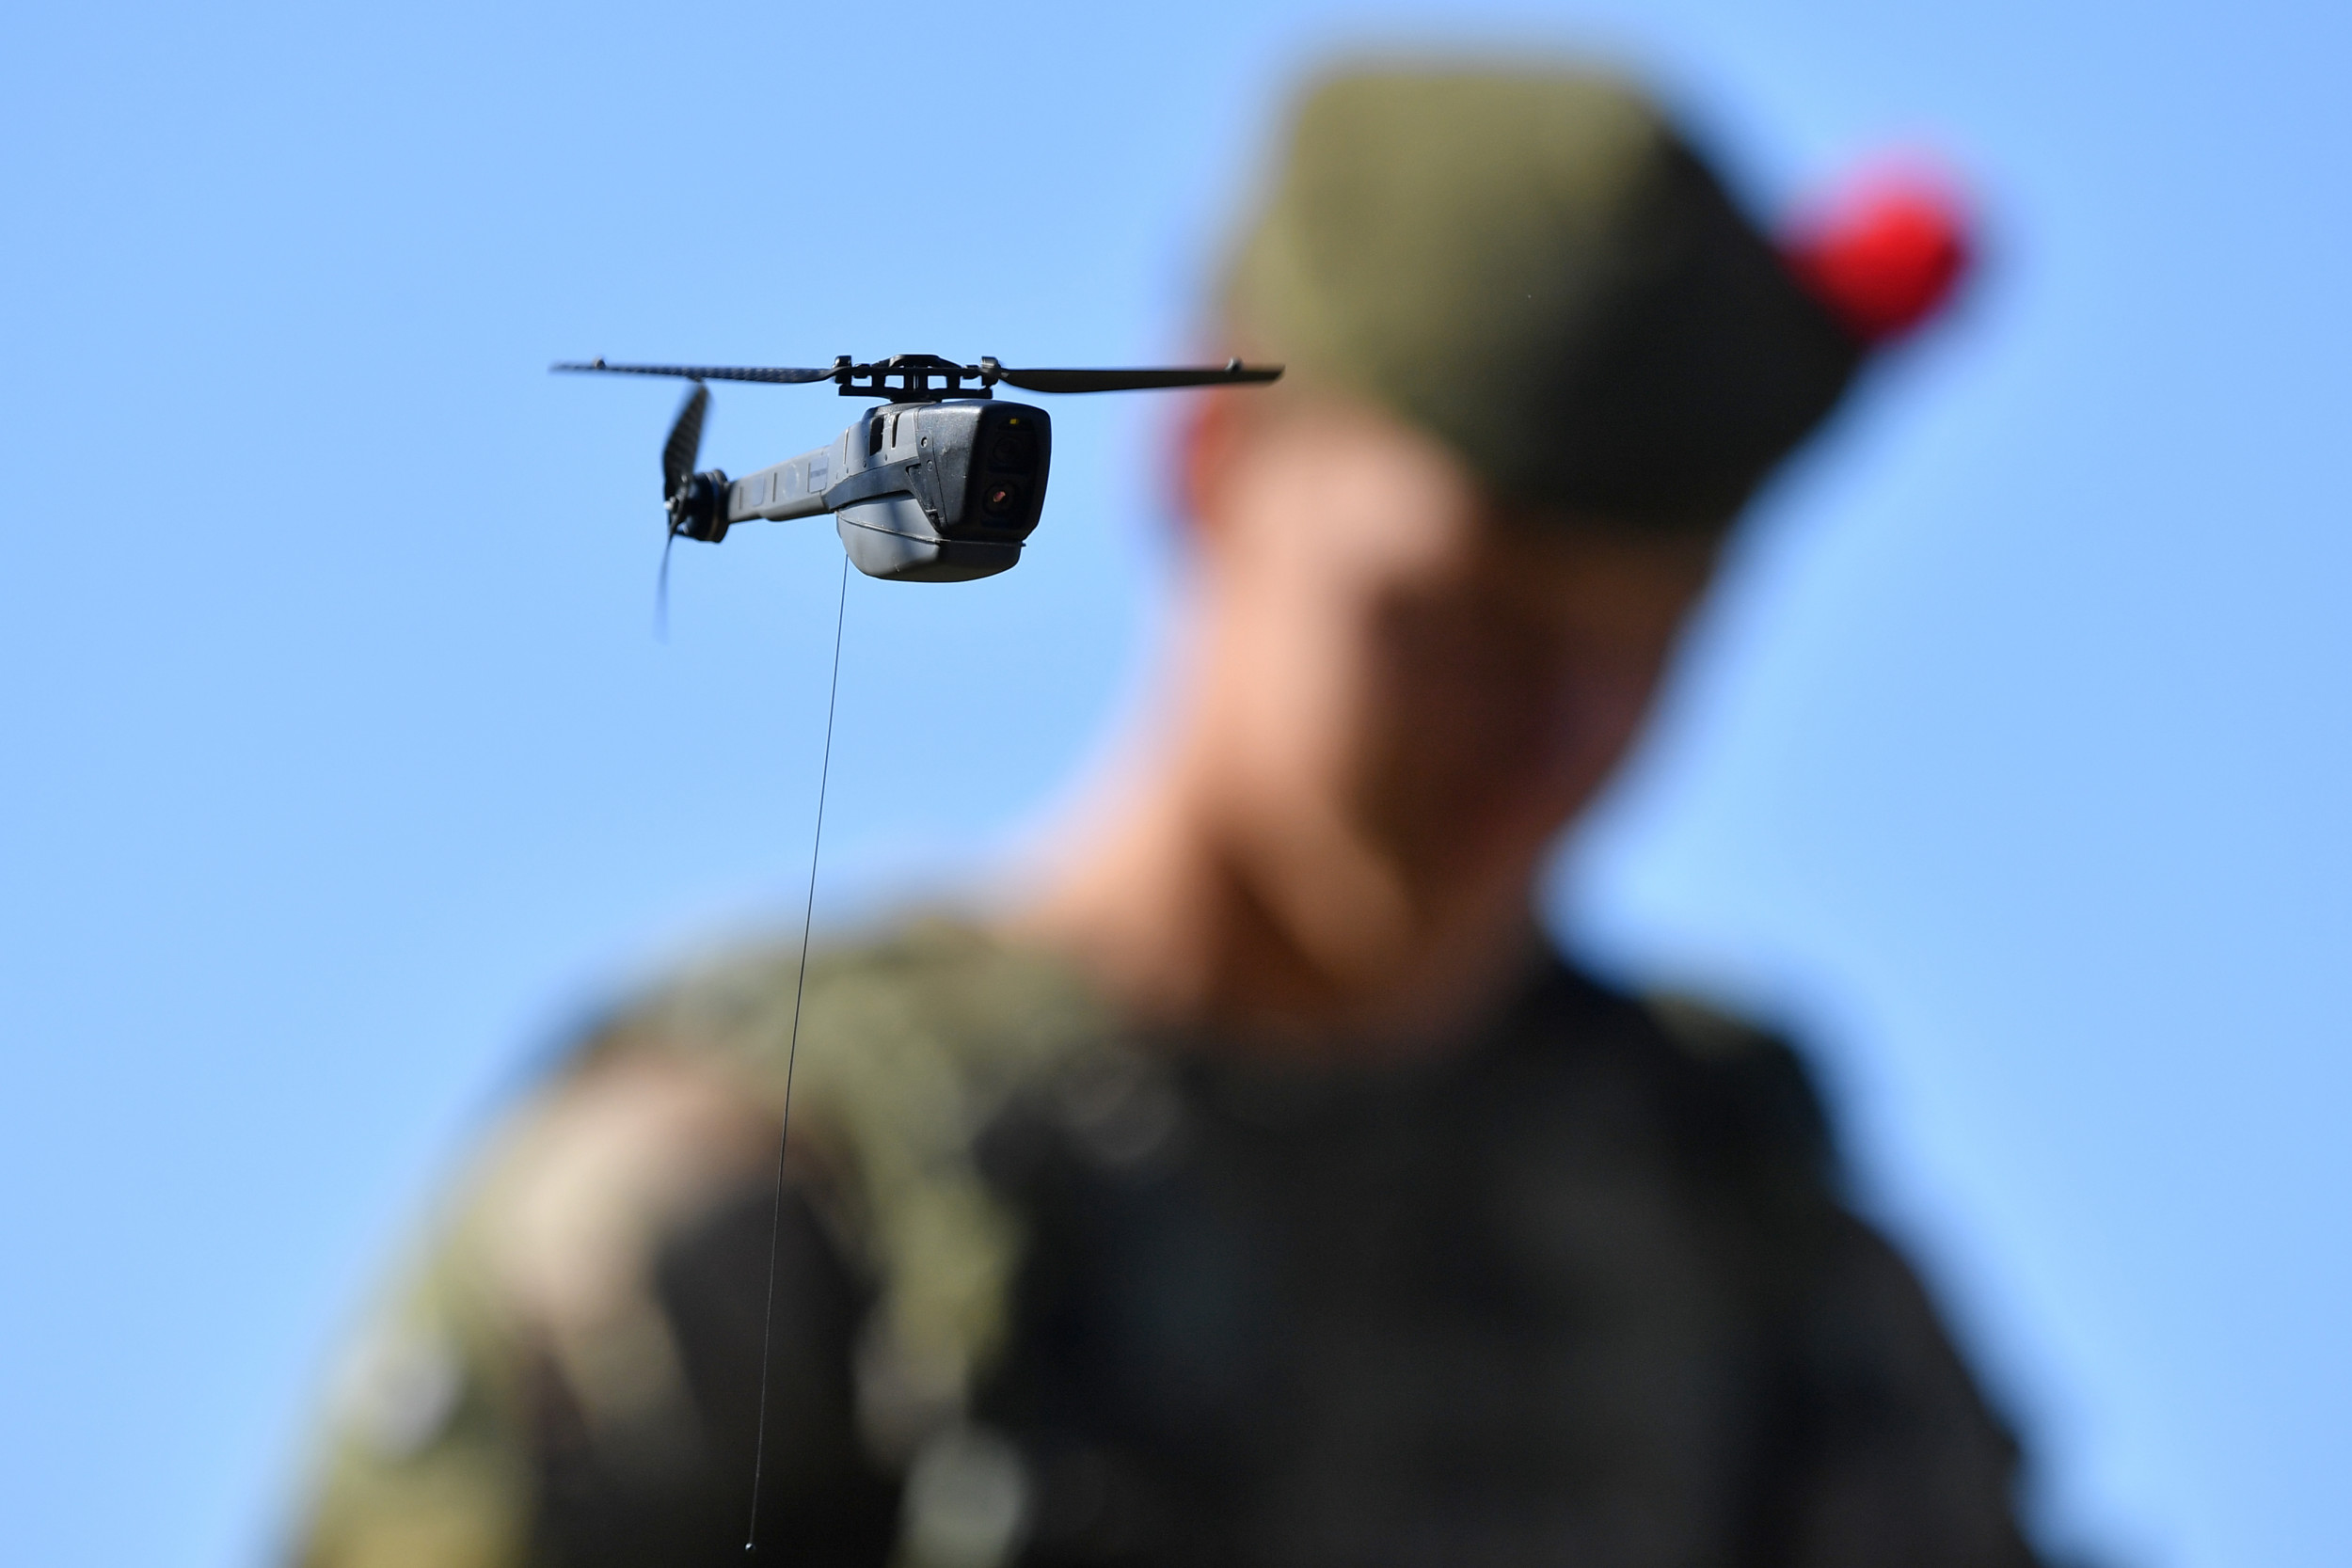 What Are Black Hornets? The Cutting-Edge Micro-Drones Donated to